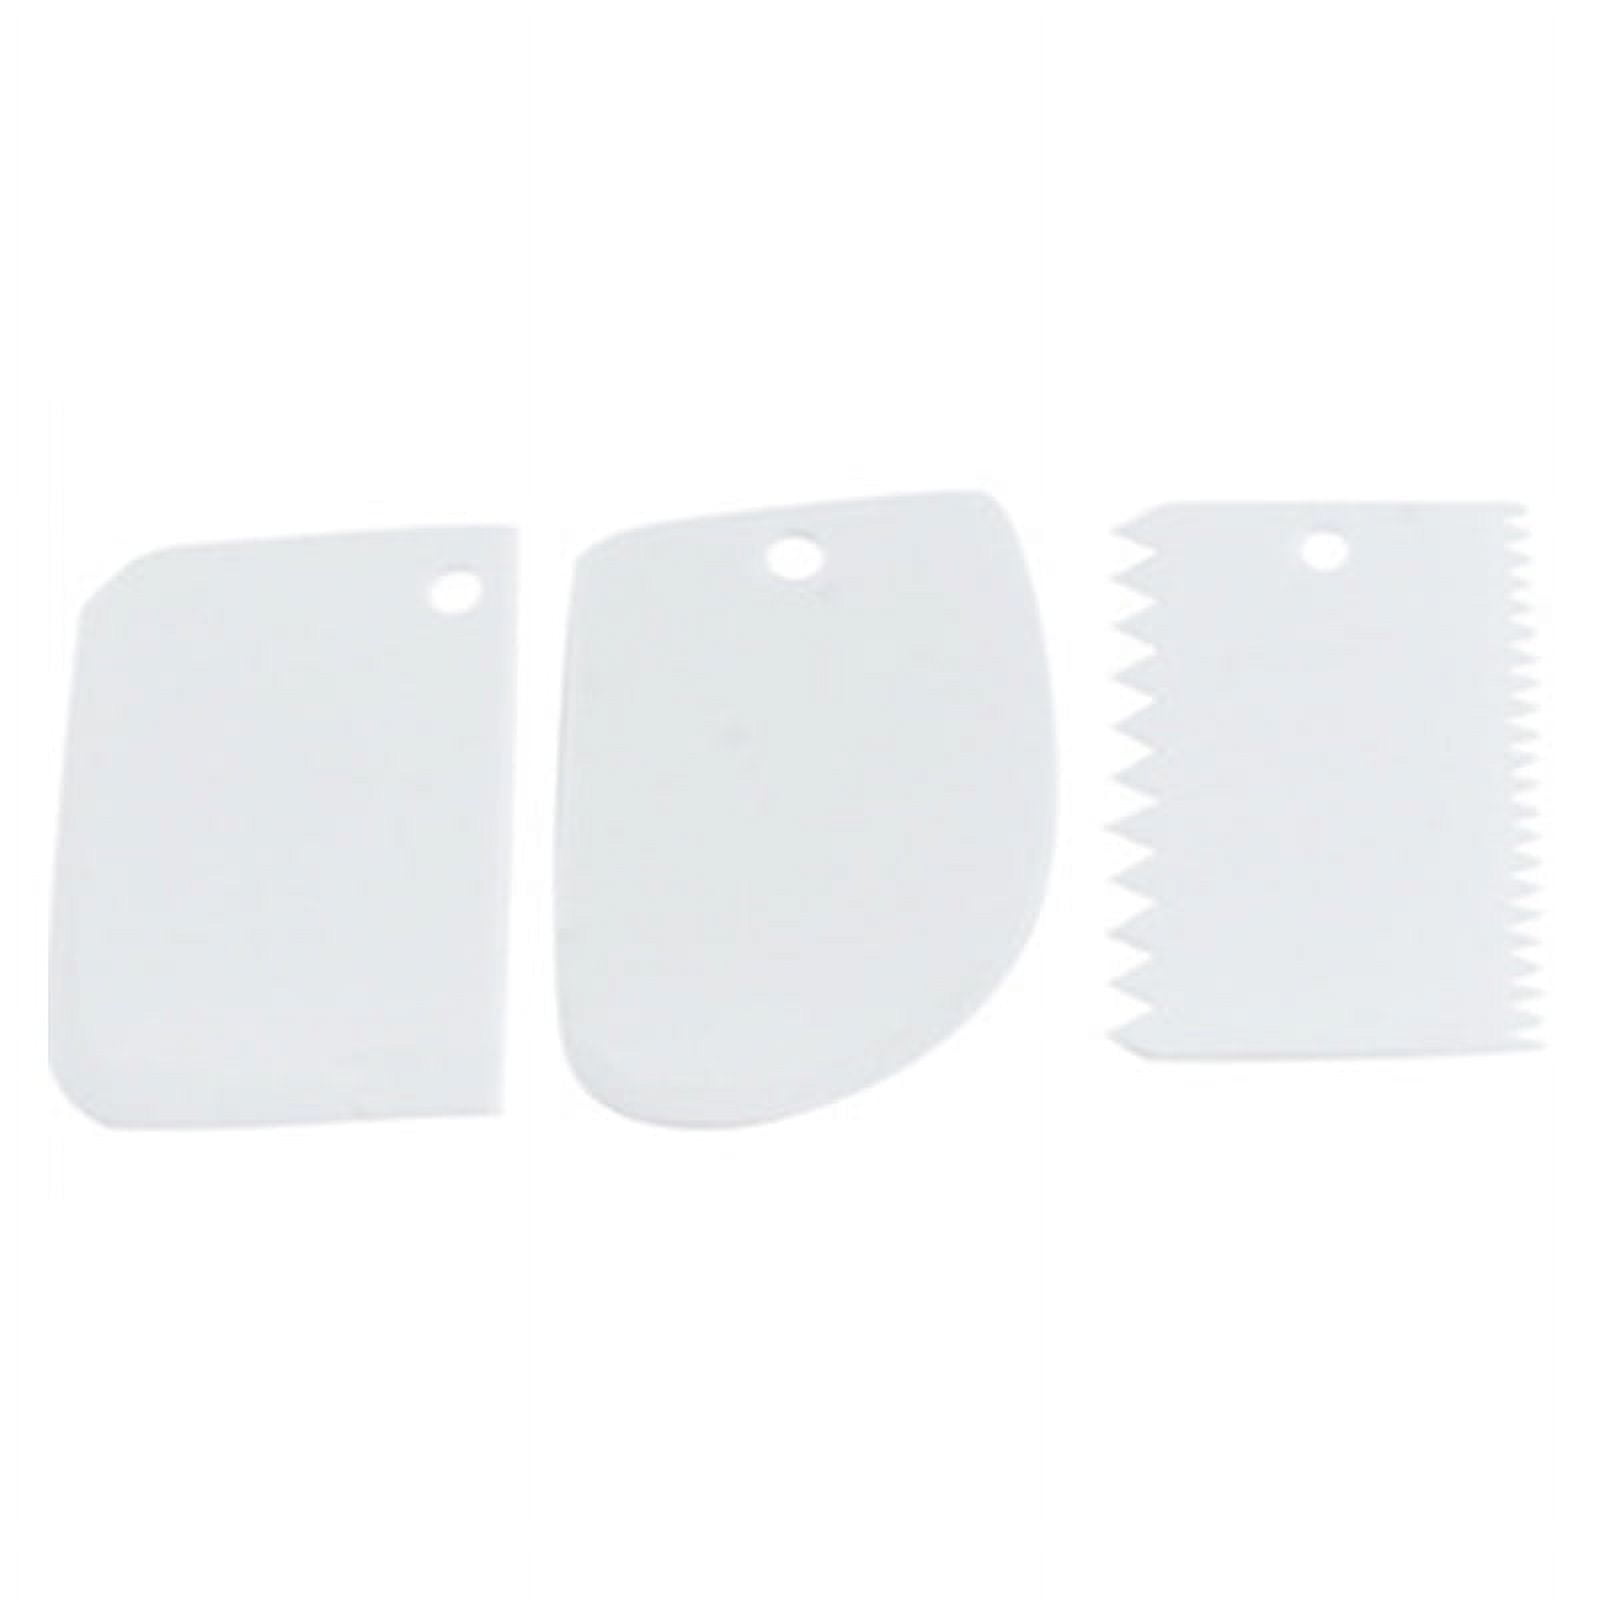 Extra Large Plastic Dough Scraper Smooth Cake Pastry Spatula